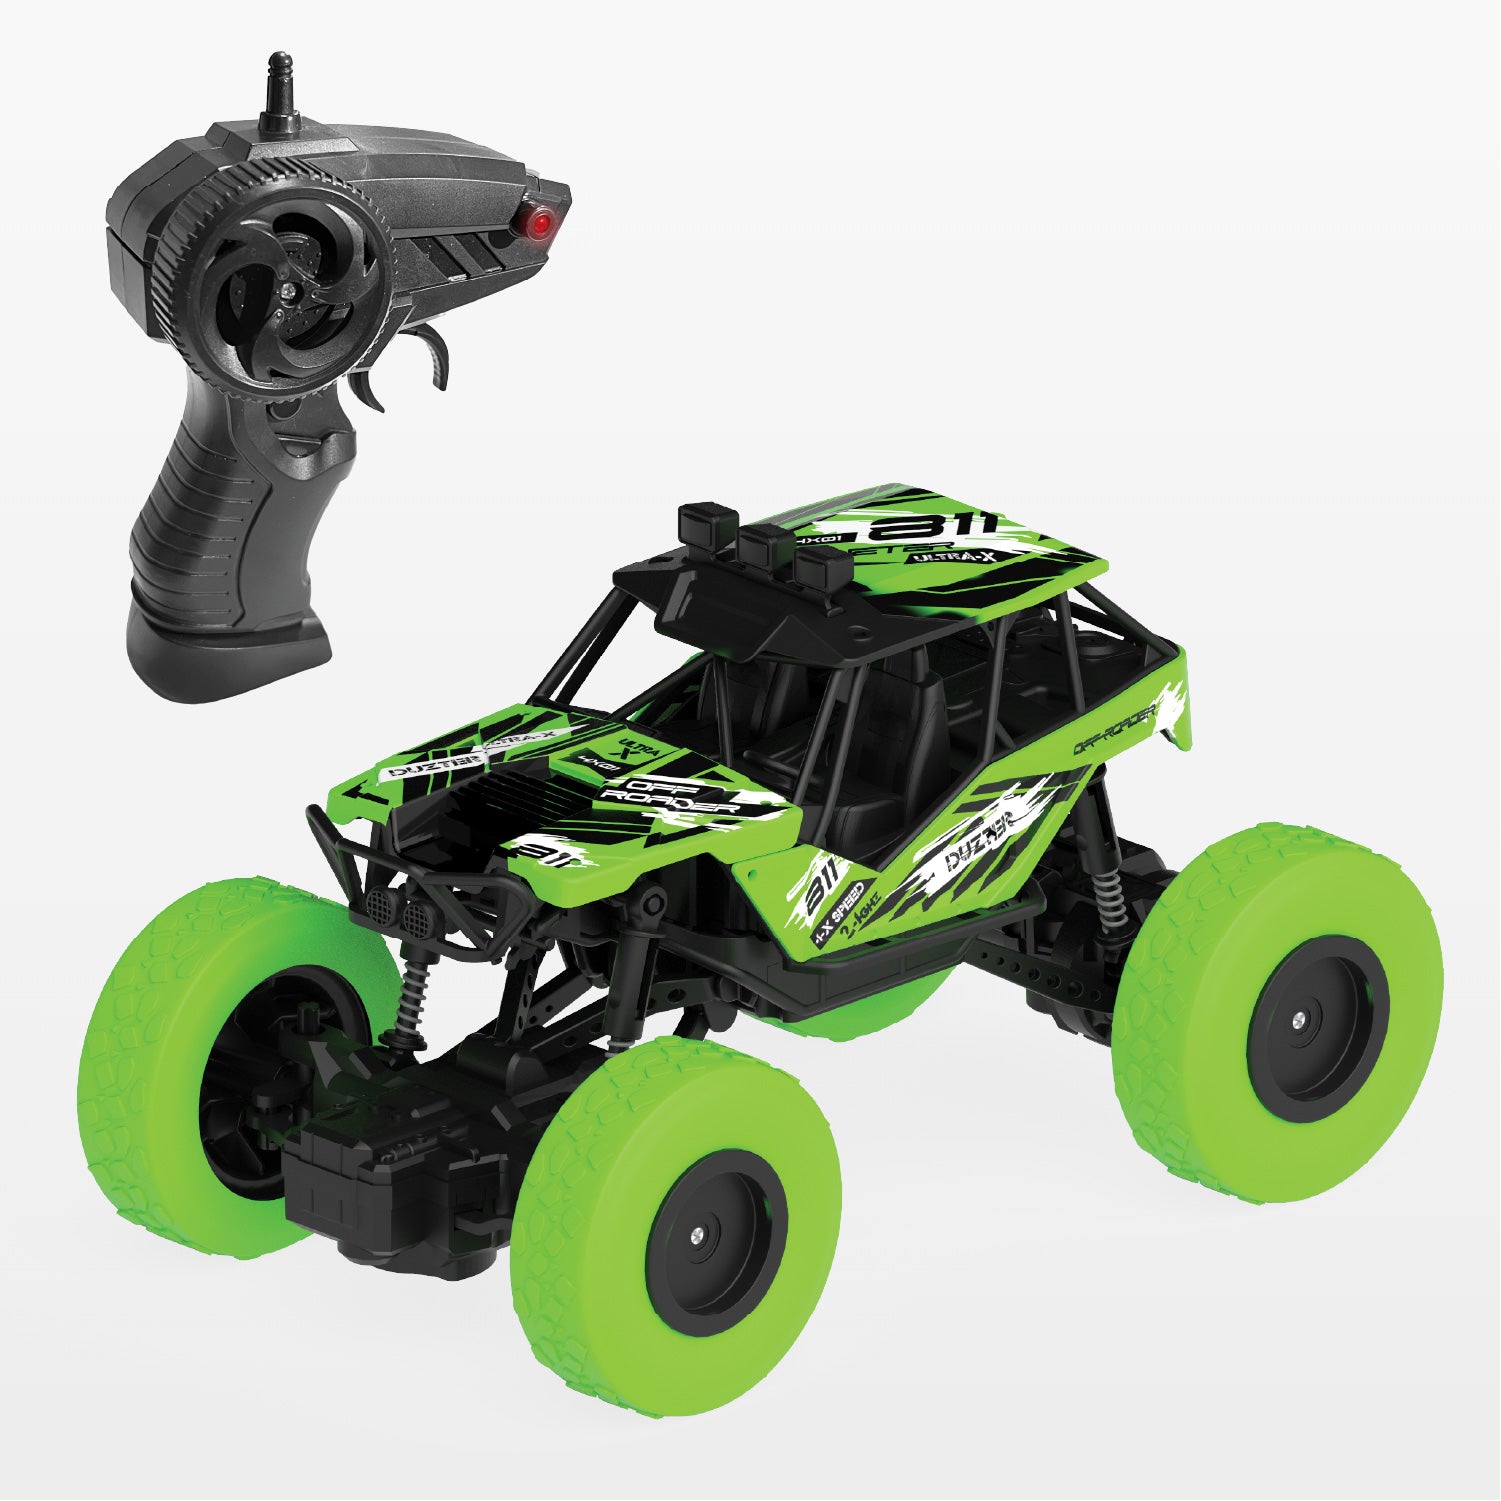 DUZTER- THE OFF ROADER - RC car 2.4GHZ with 3.7V Rechargeable Battery - Green